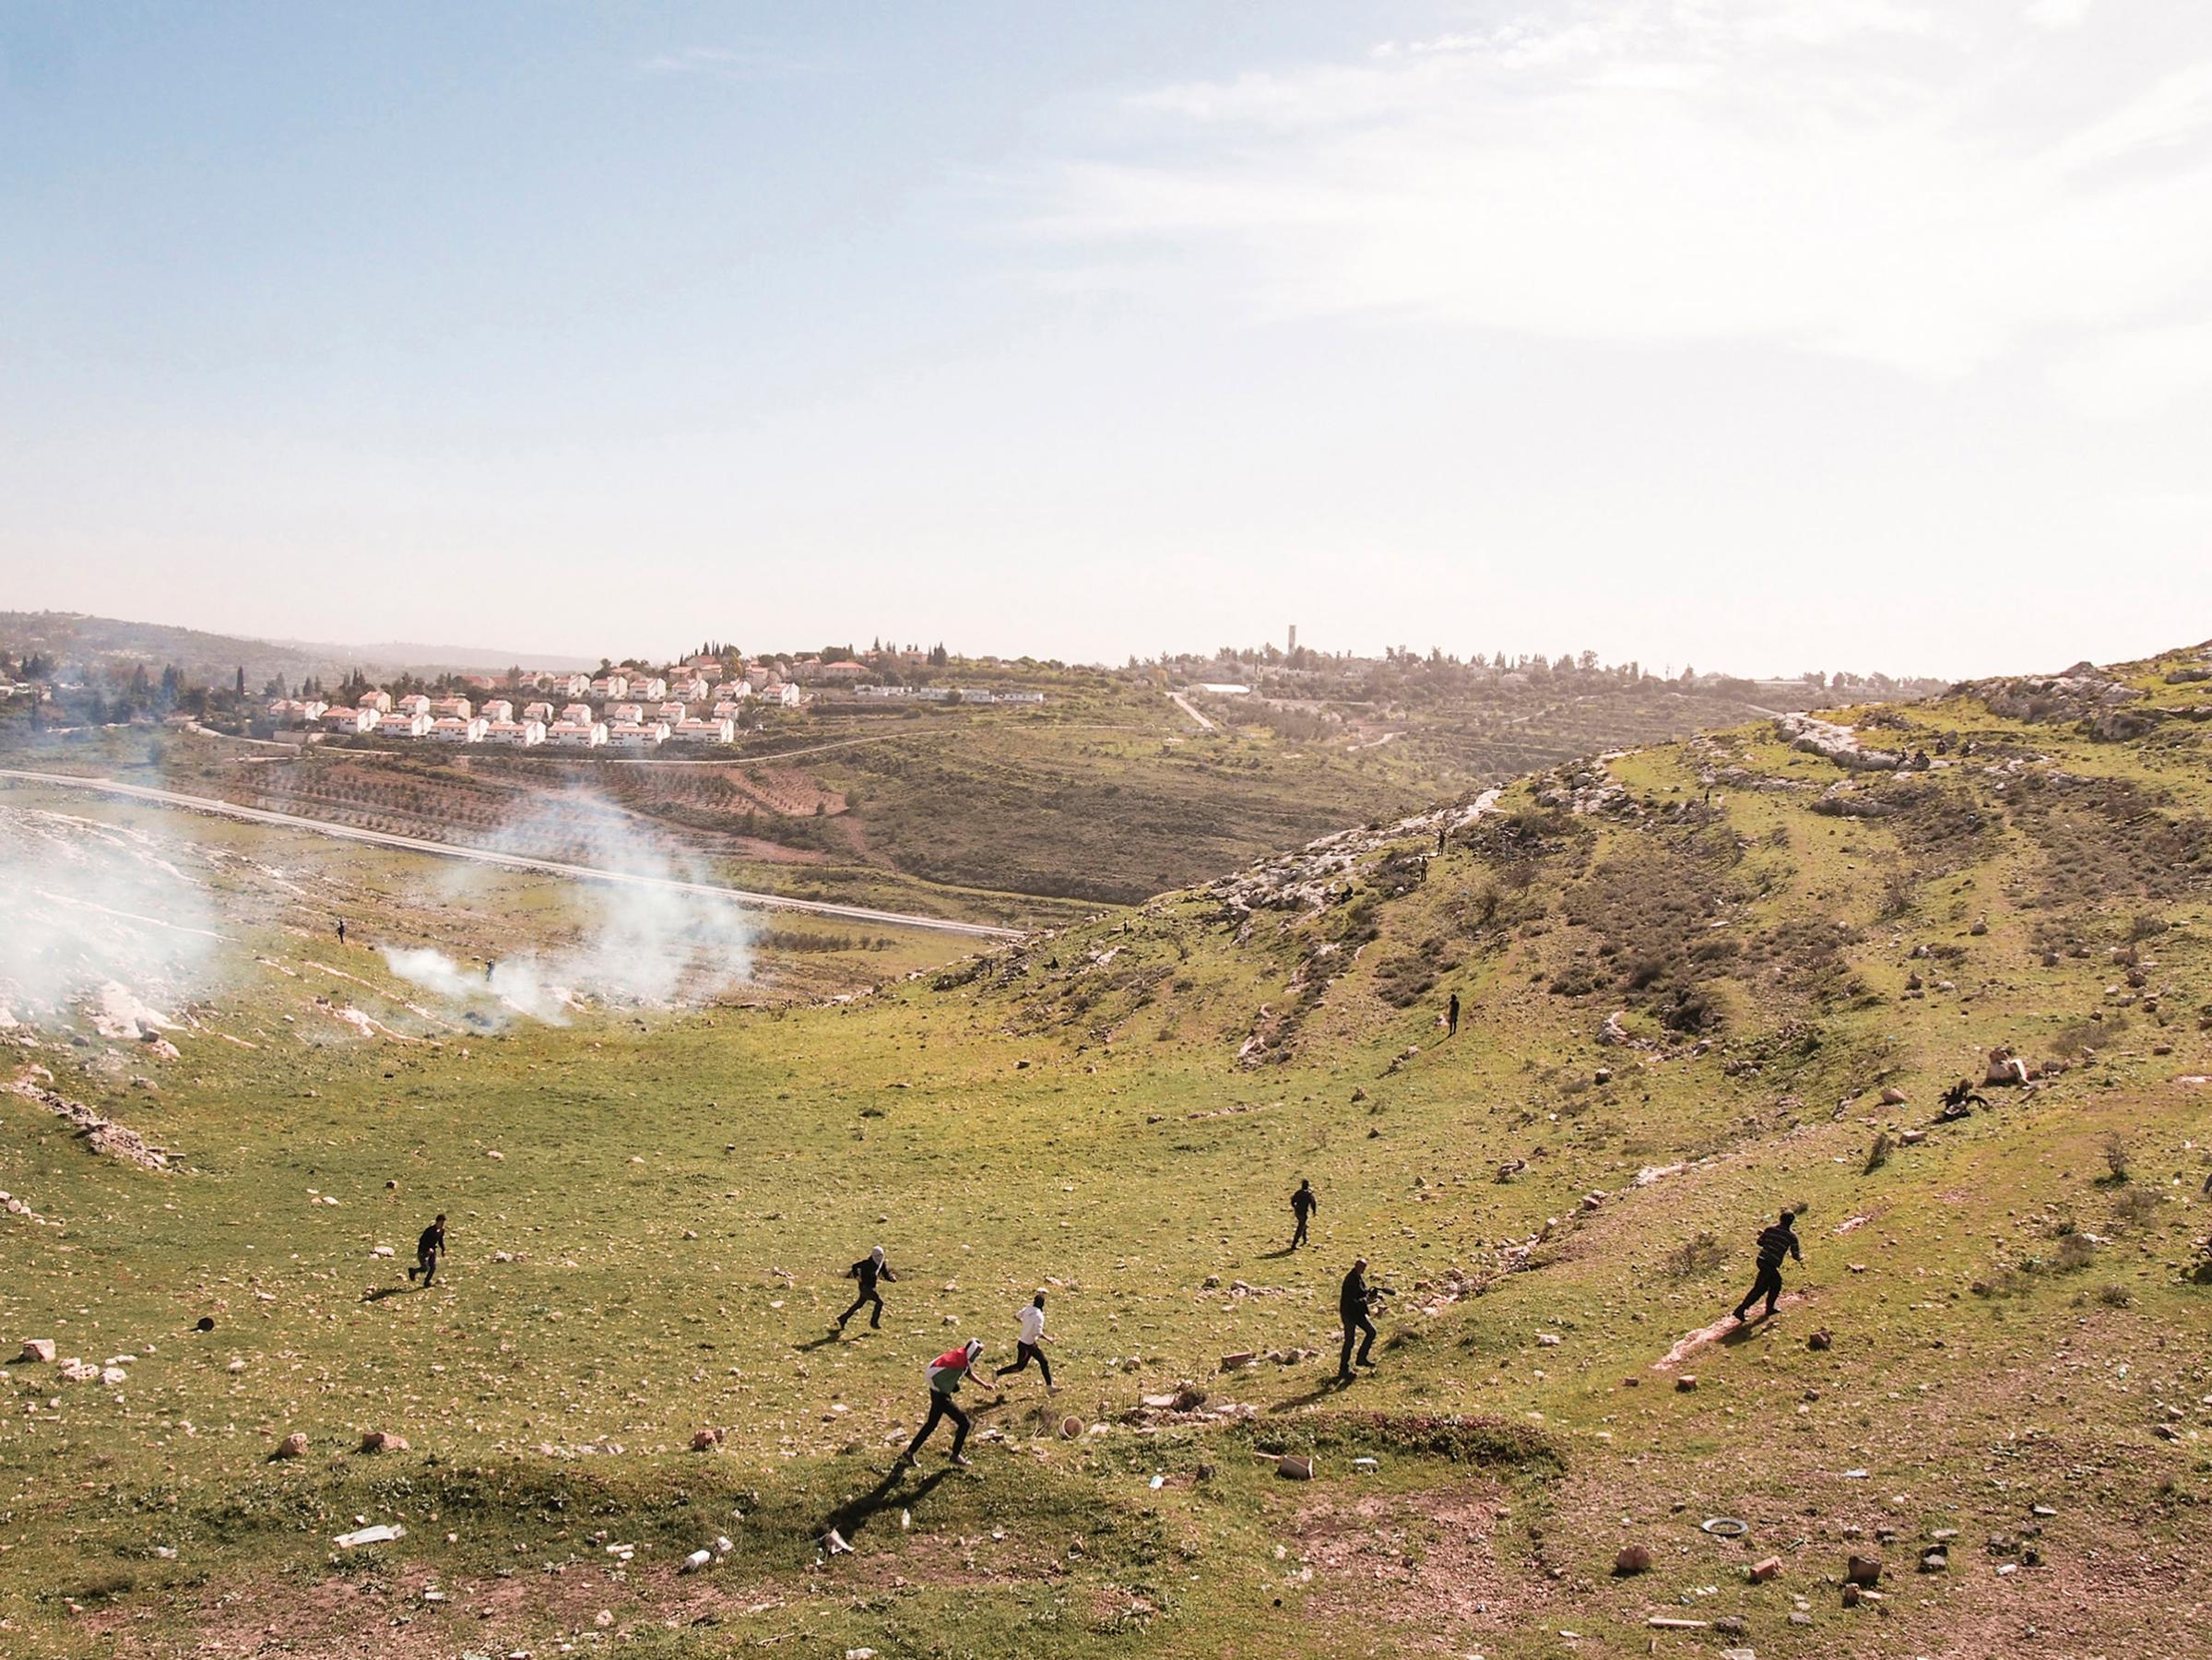 WEST BANK. Nabi Saleh. 2013. Palestinian protestors run from tear gas fired by Israeli soldiers at a weekly protest against the Israeli occupation.